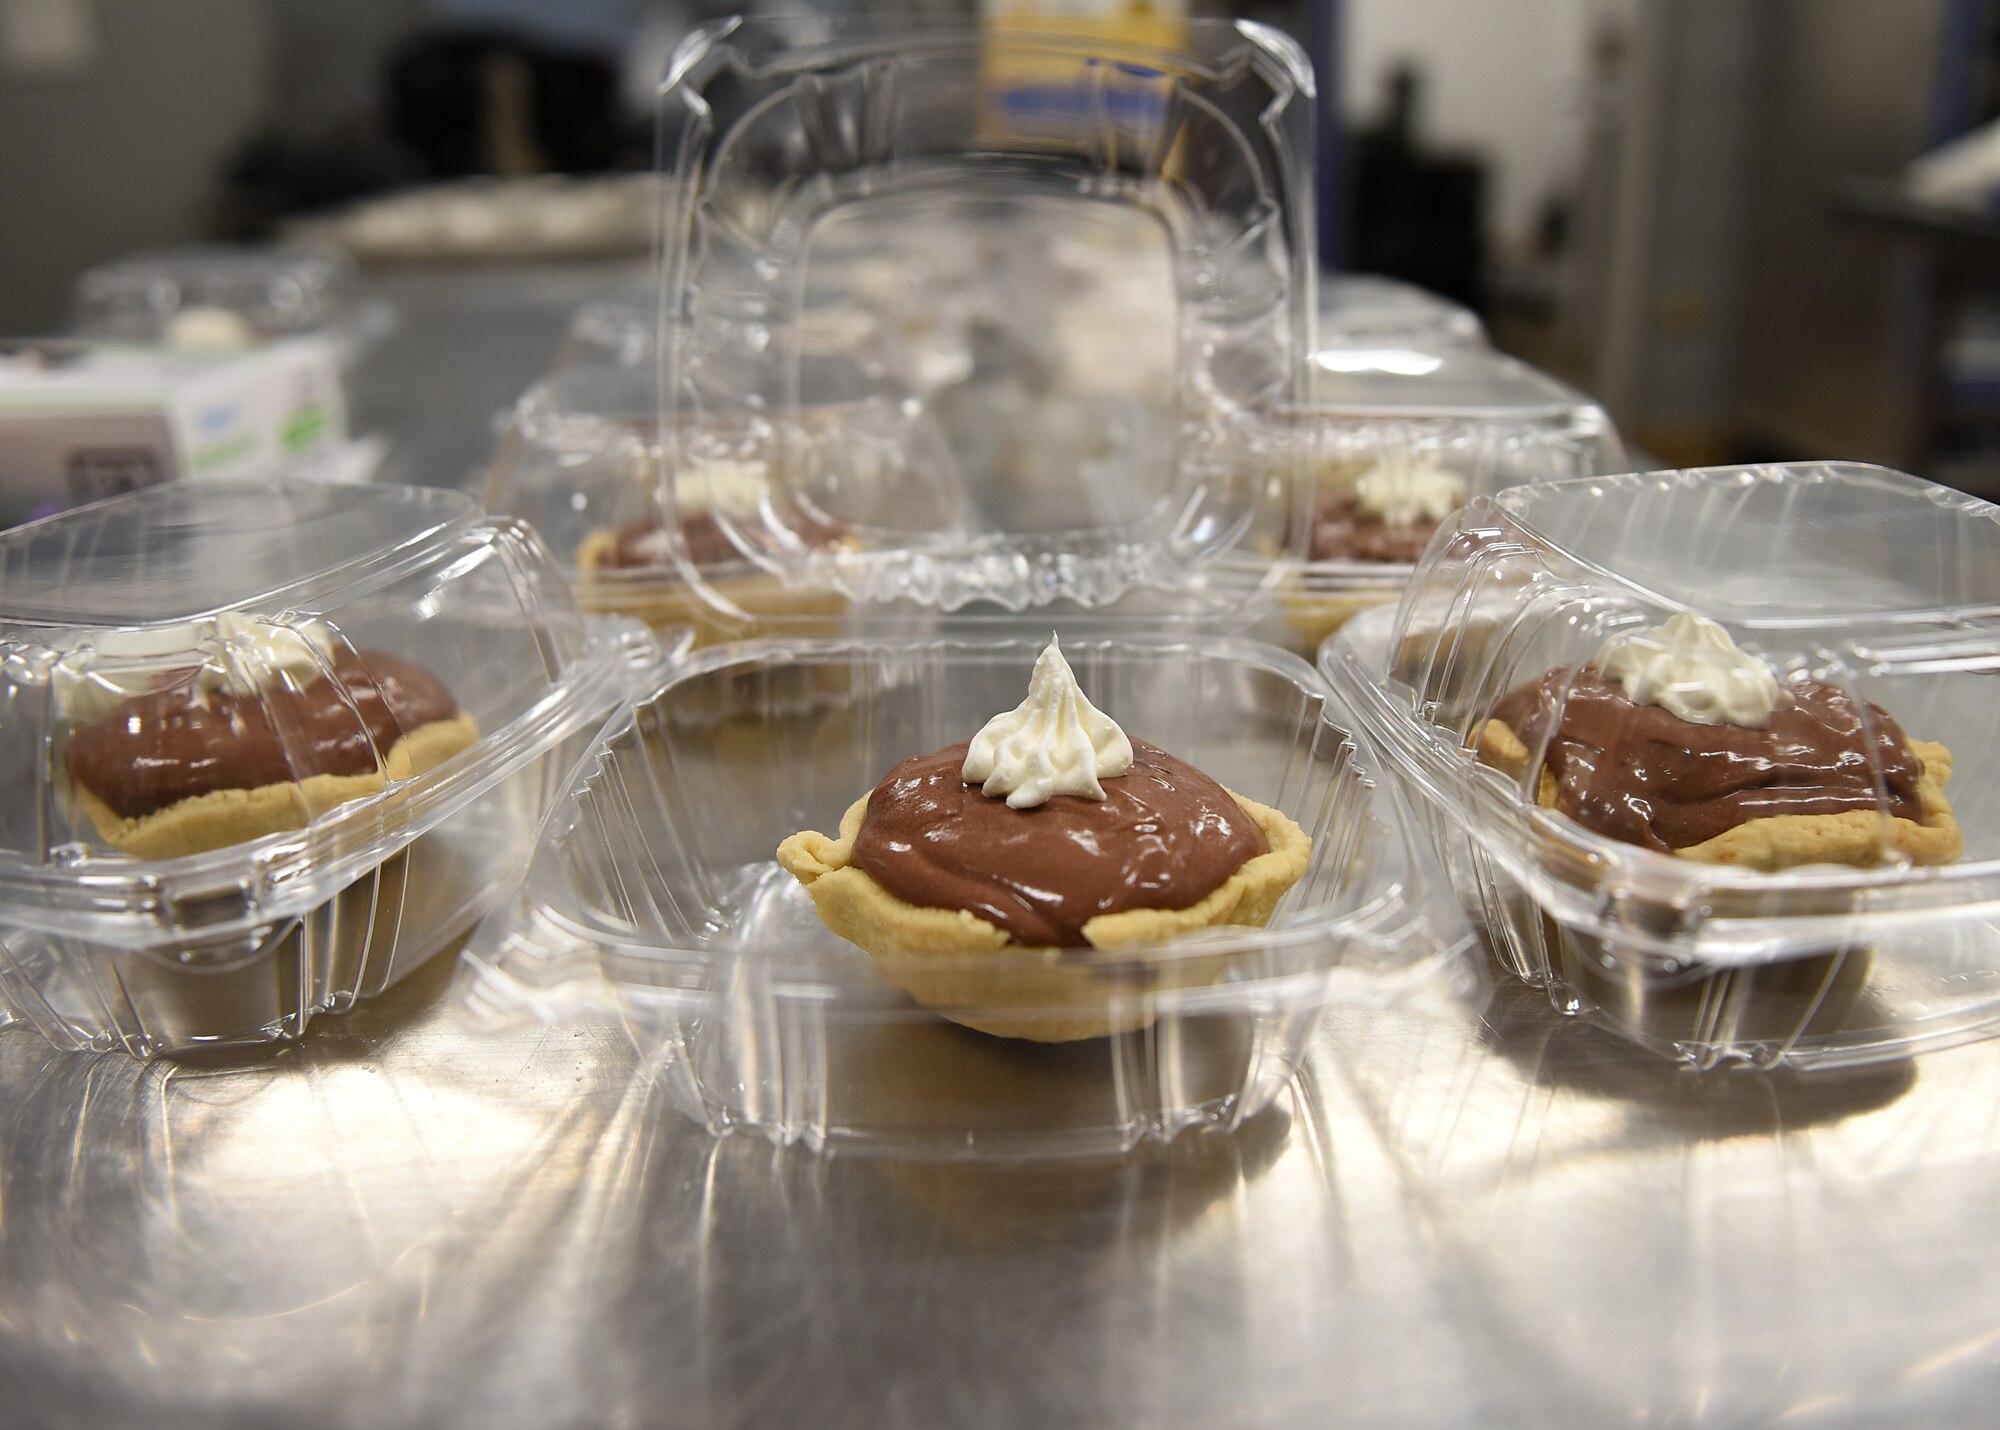 Chocolate pudding pies sit on a table at the Ozark Inn dining facility on Nov. 20, 2018 at Whiteman Air Force Base, Missouri.